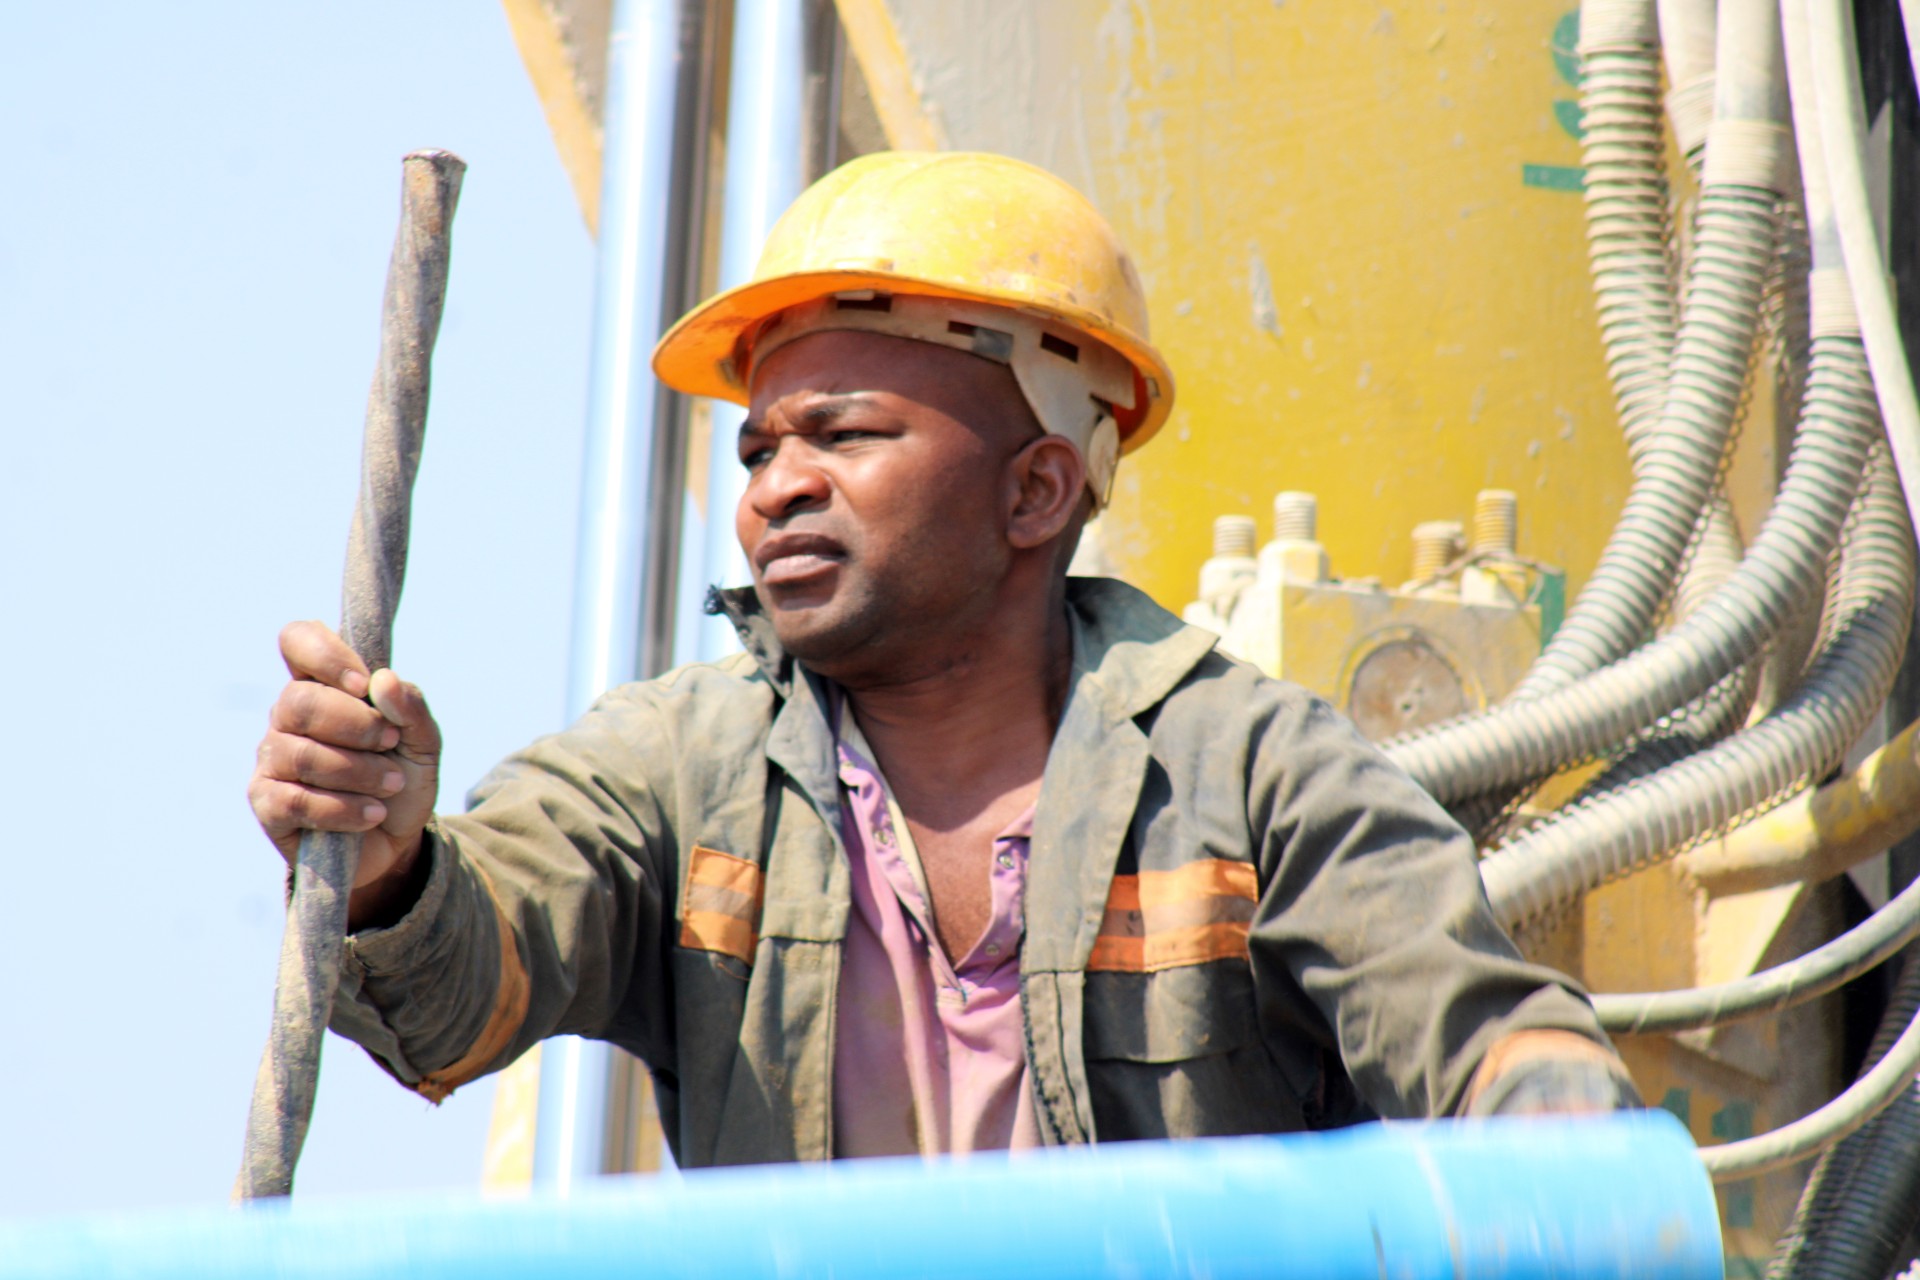 Choosing A Borehole Drilling Company In Zimbabwe Can Be Daunting - BUT READ THIS!